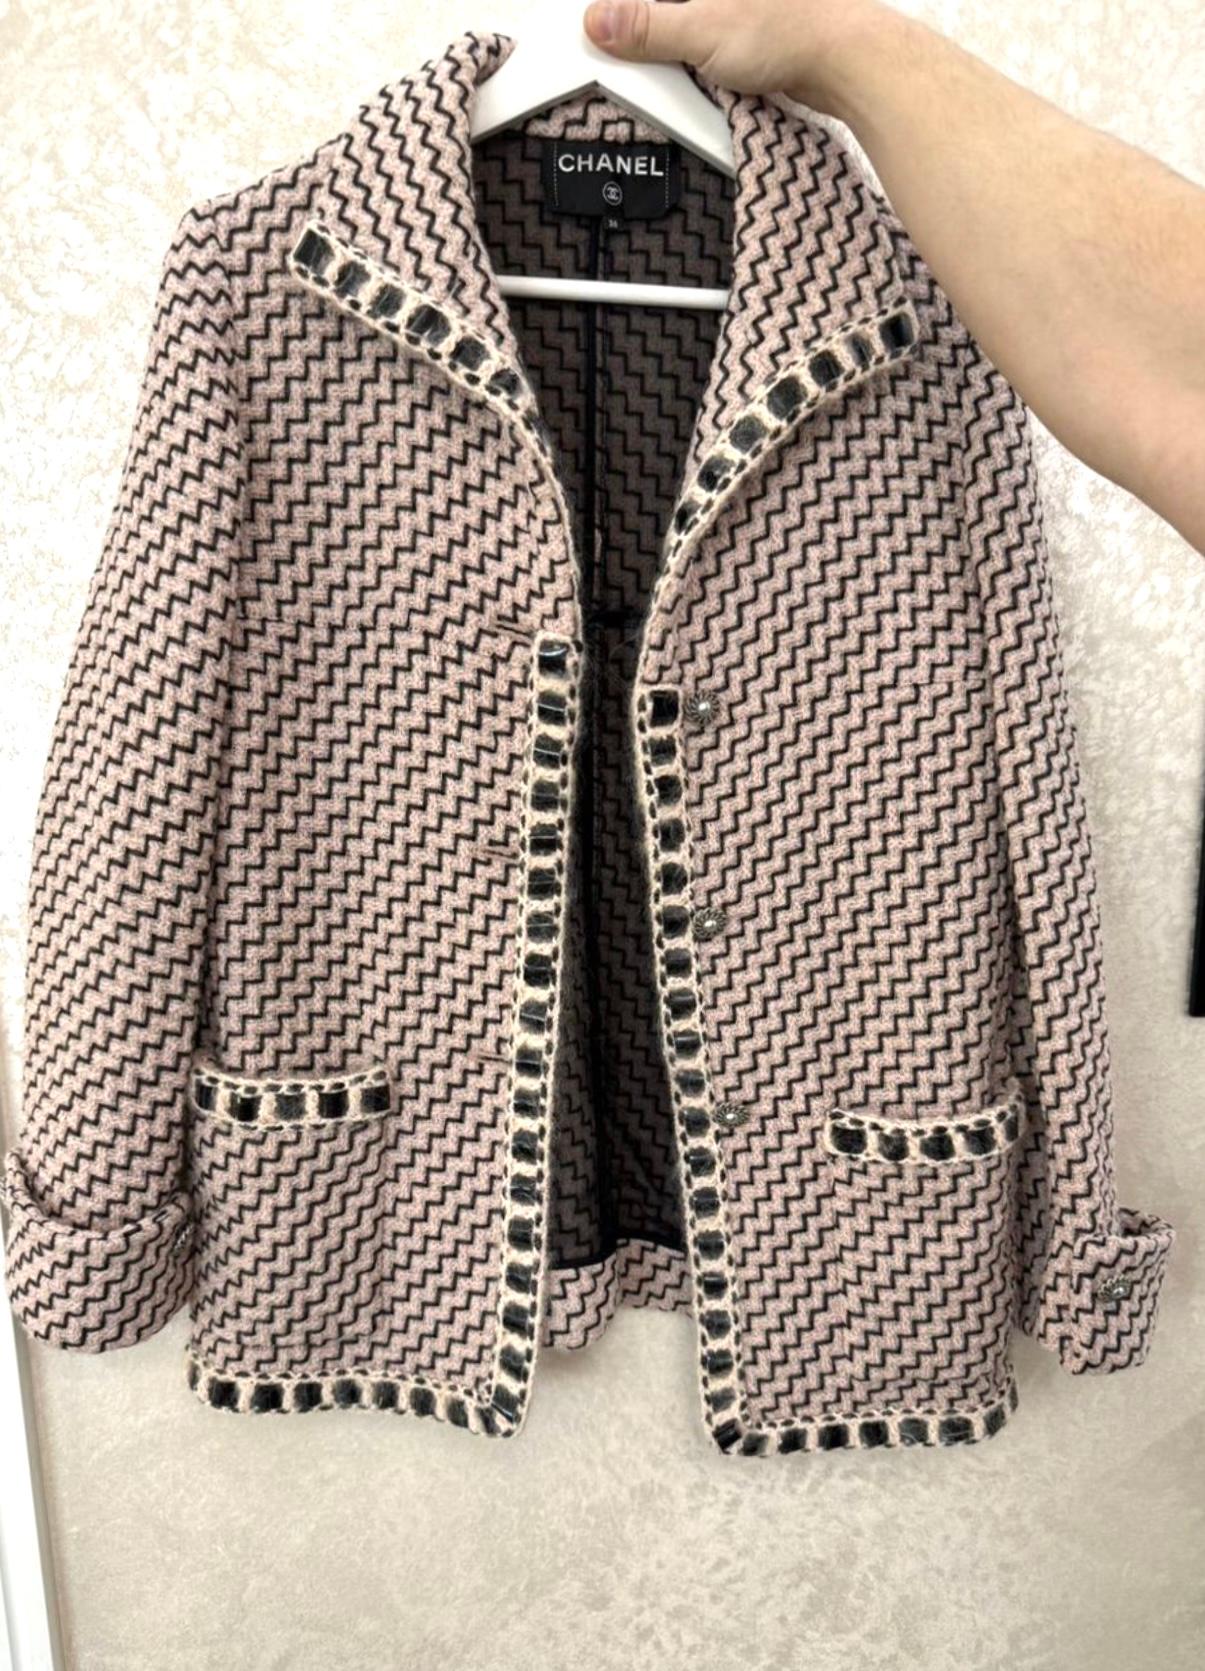 Chanel Paris /Rome Runway Tweed and Lace Jacket 5